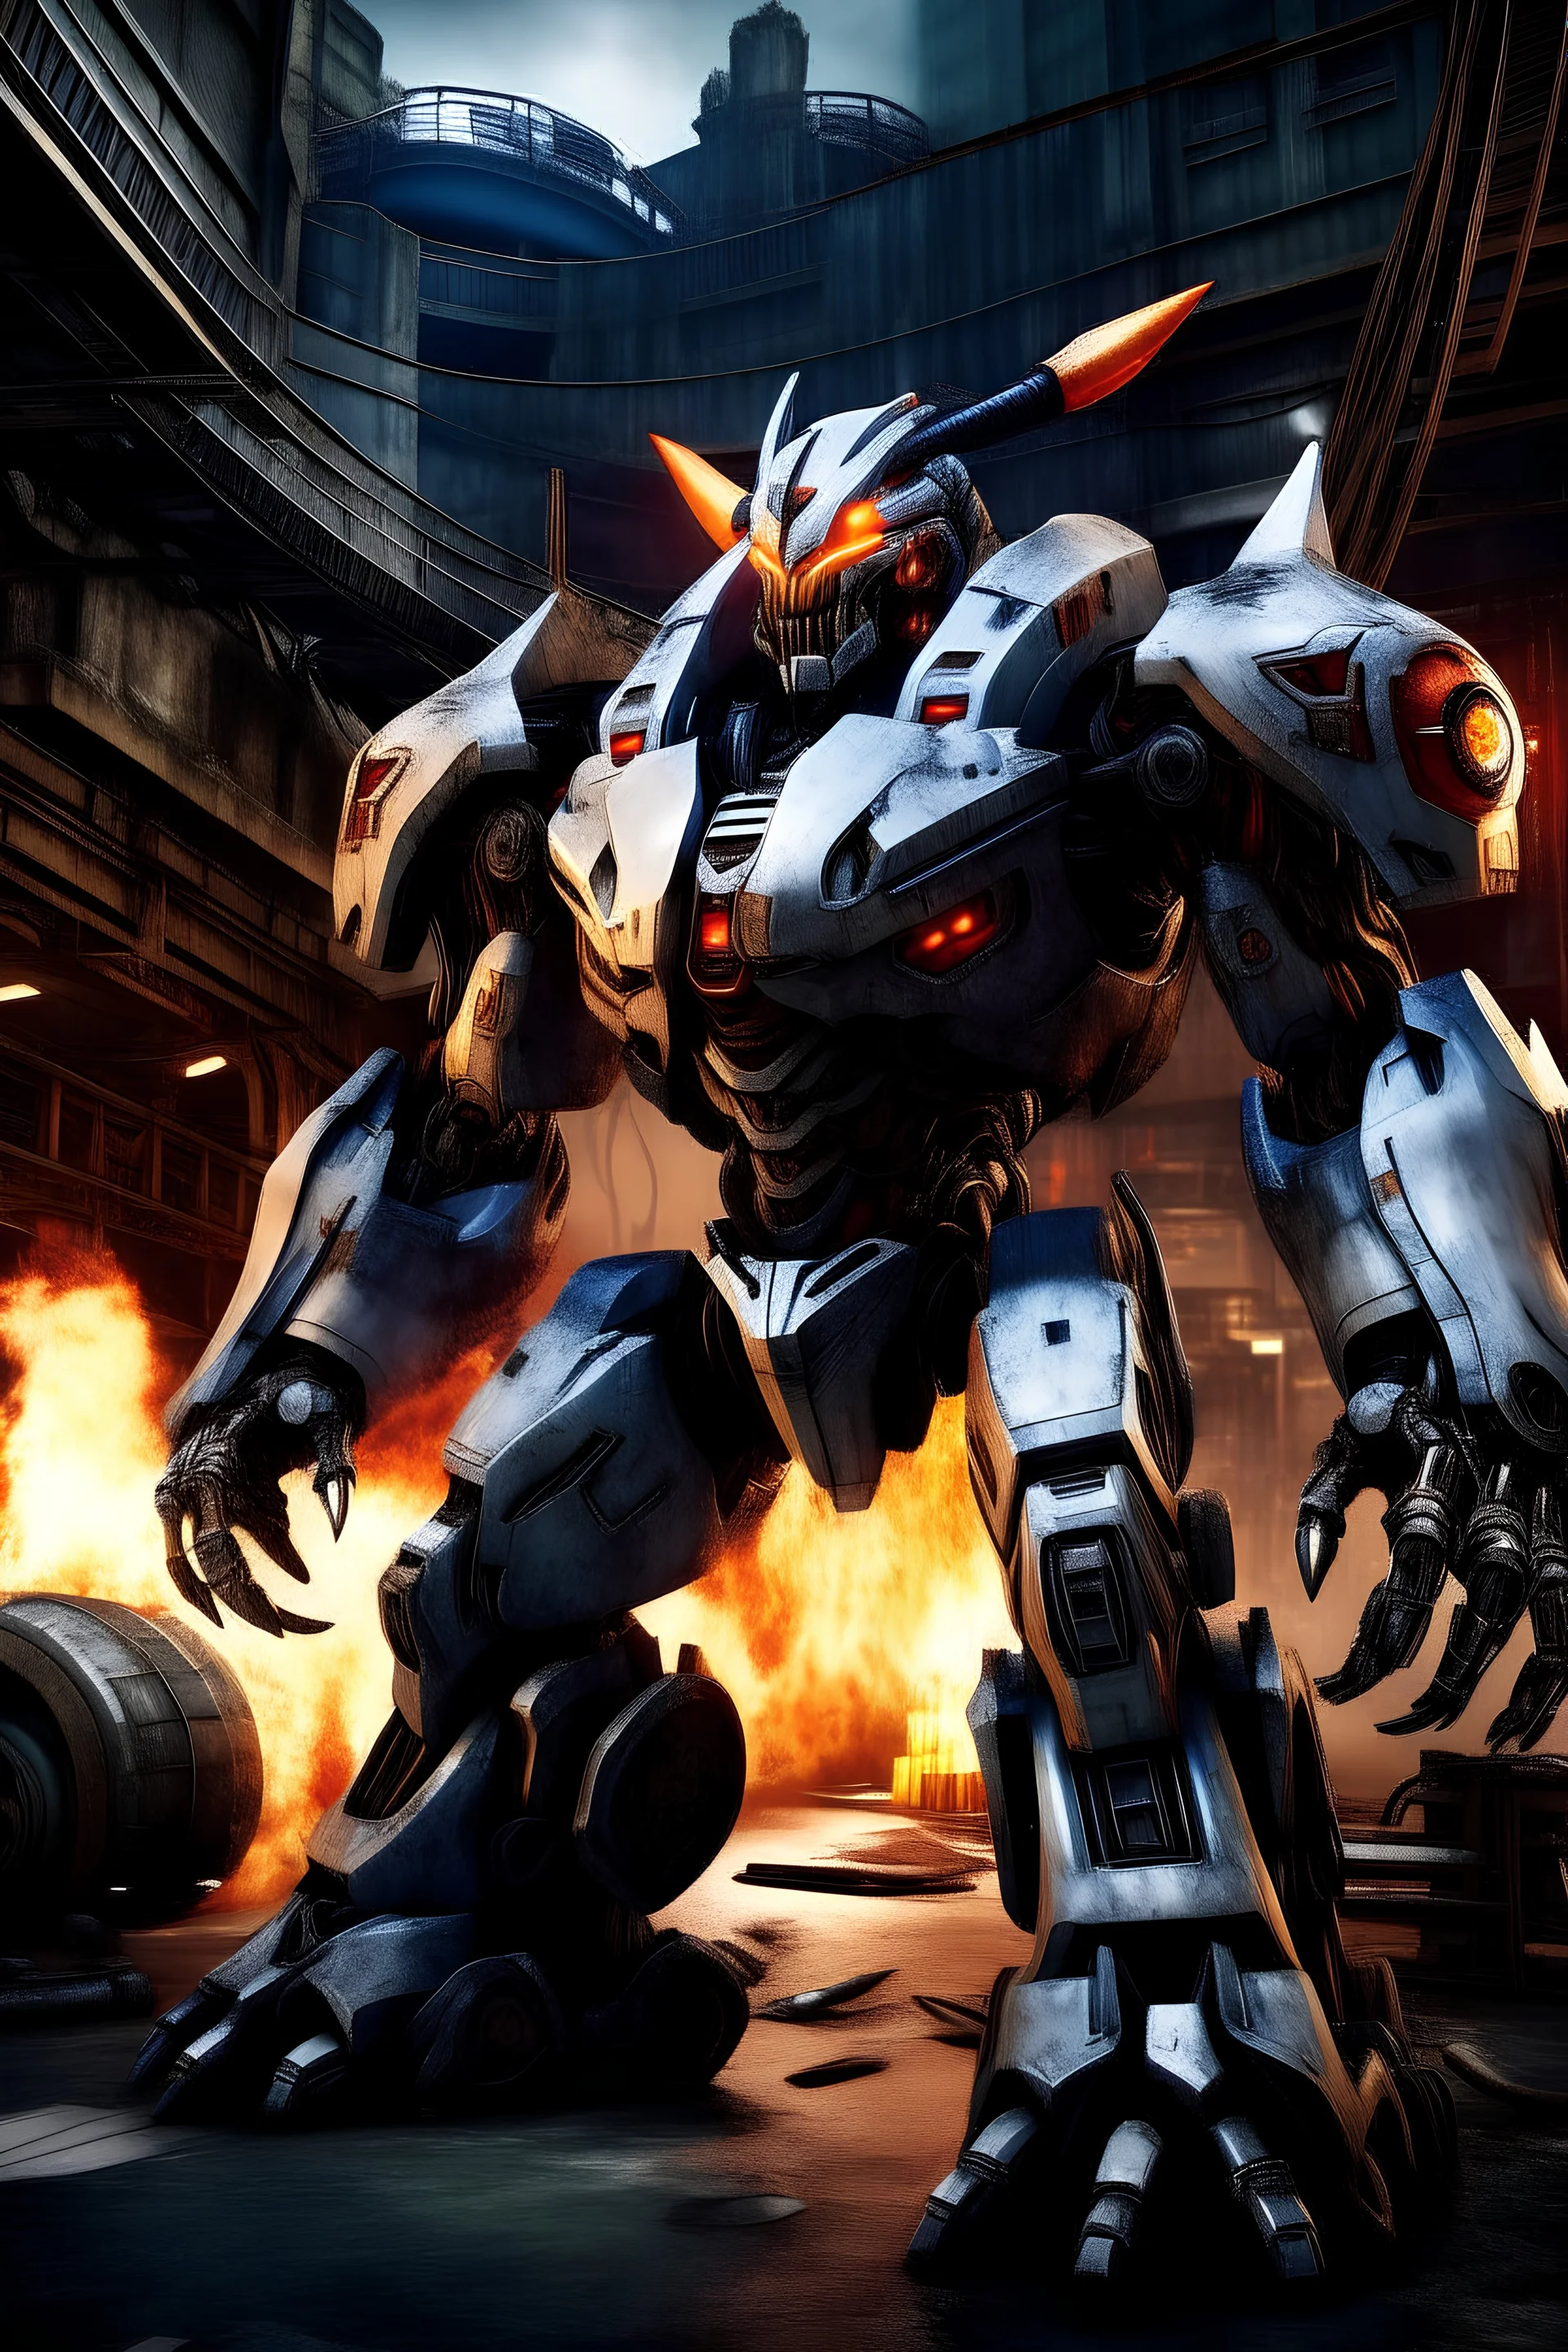 a detailed picture of a Pacific Rim Jaeger as if it were made by the Harley Davidson Motorcycle company. It towers over the war-ravaged city. It is decorated with lots of chrome, airbrushed flames , and a big Willy G skull on its chest plate. It has many weapons and lights. Cinematic shot.